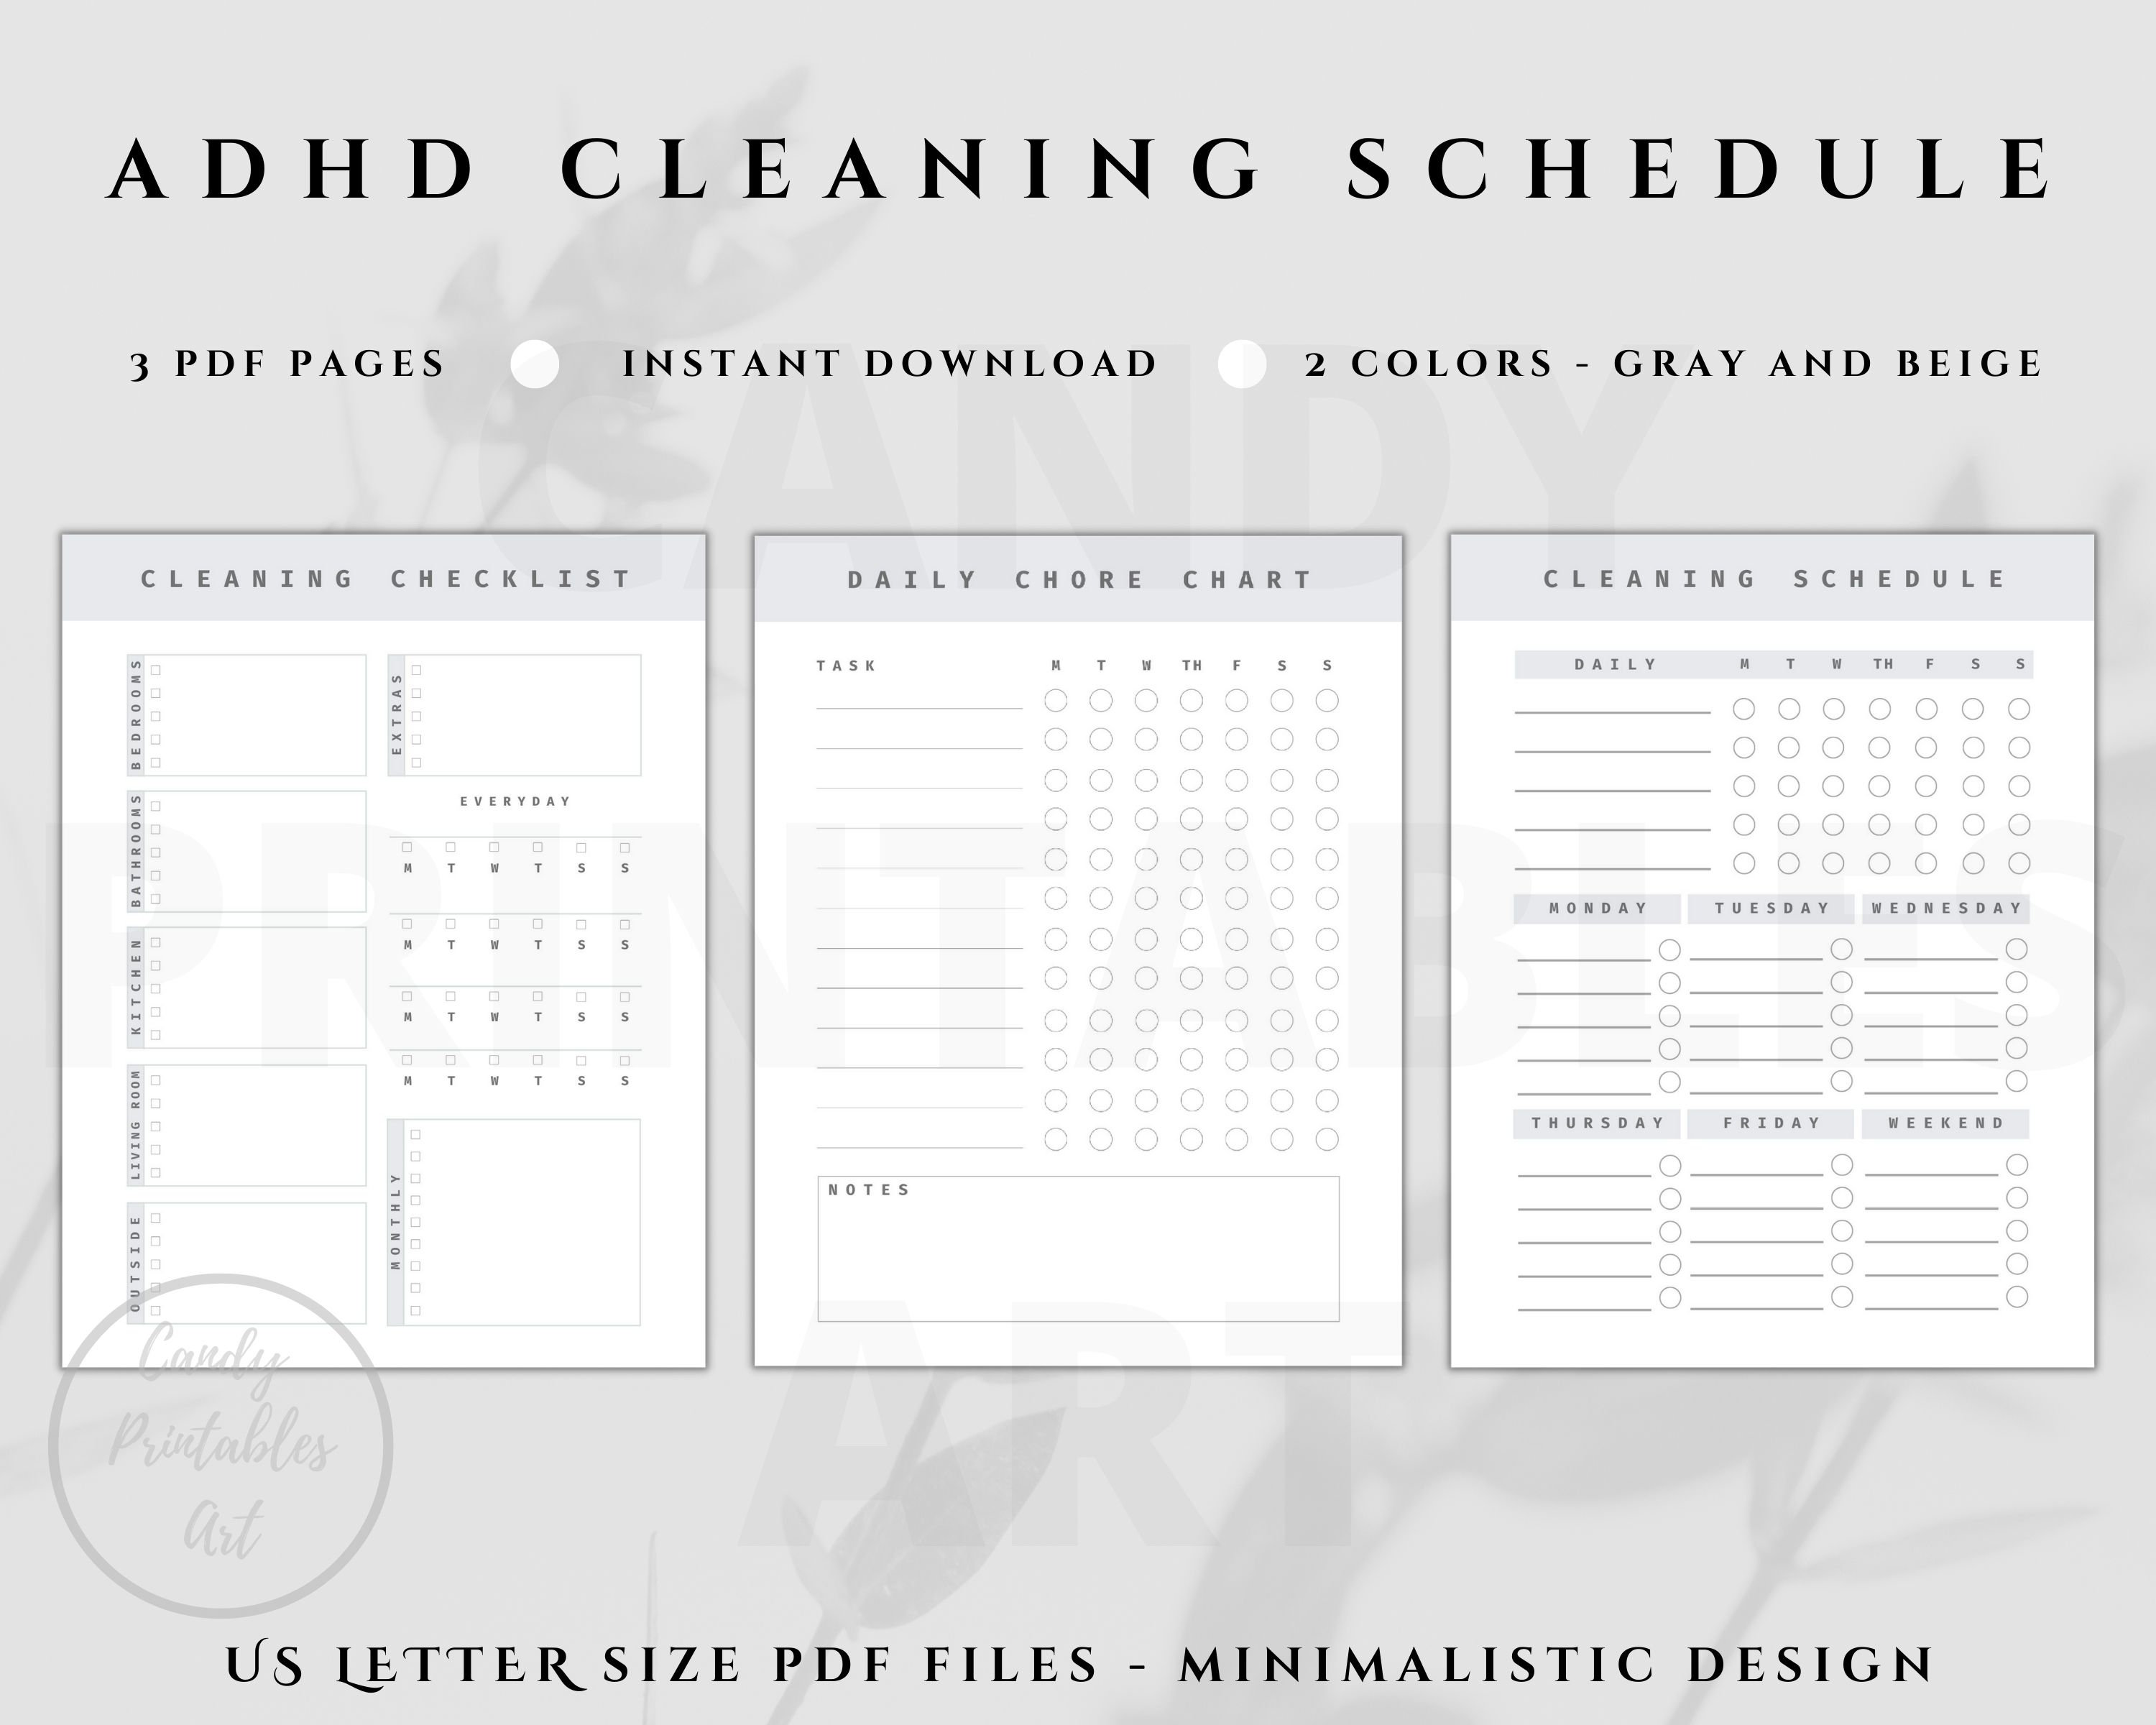 adhd-cleaning-schedule-checklist-adhd-chore-chart-daily-etsy-nederland